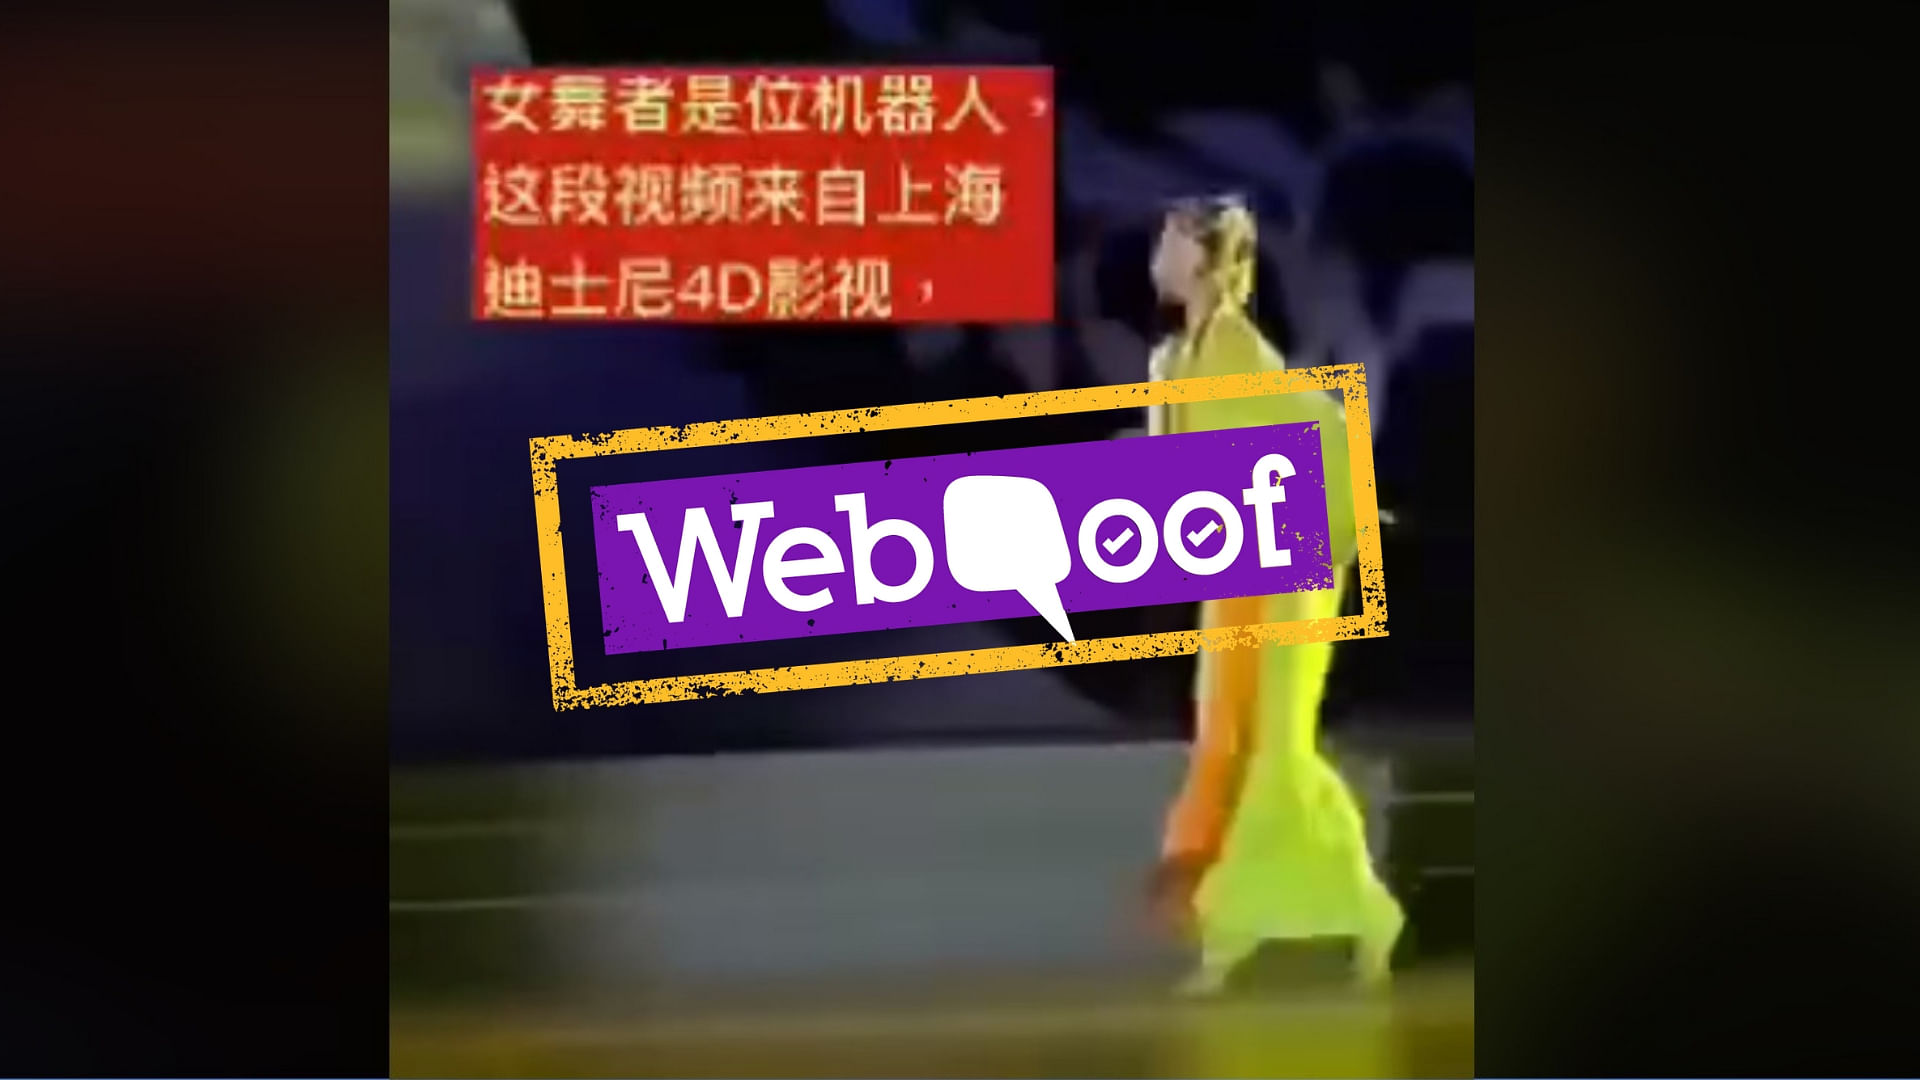 The caption shared along with the video claims that the classical dancer is not a living person but rather a robot created by Shanghai Disney.